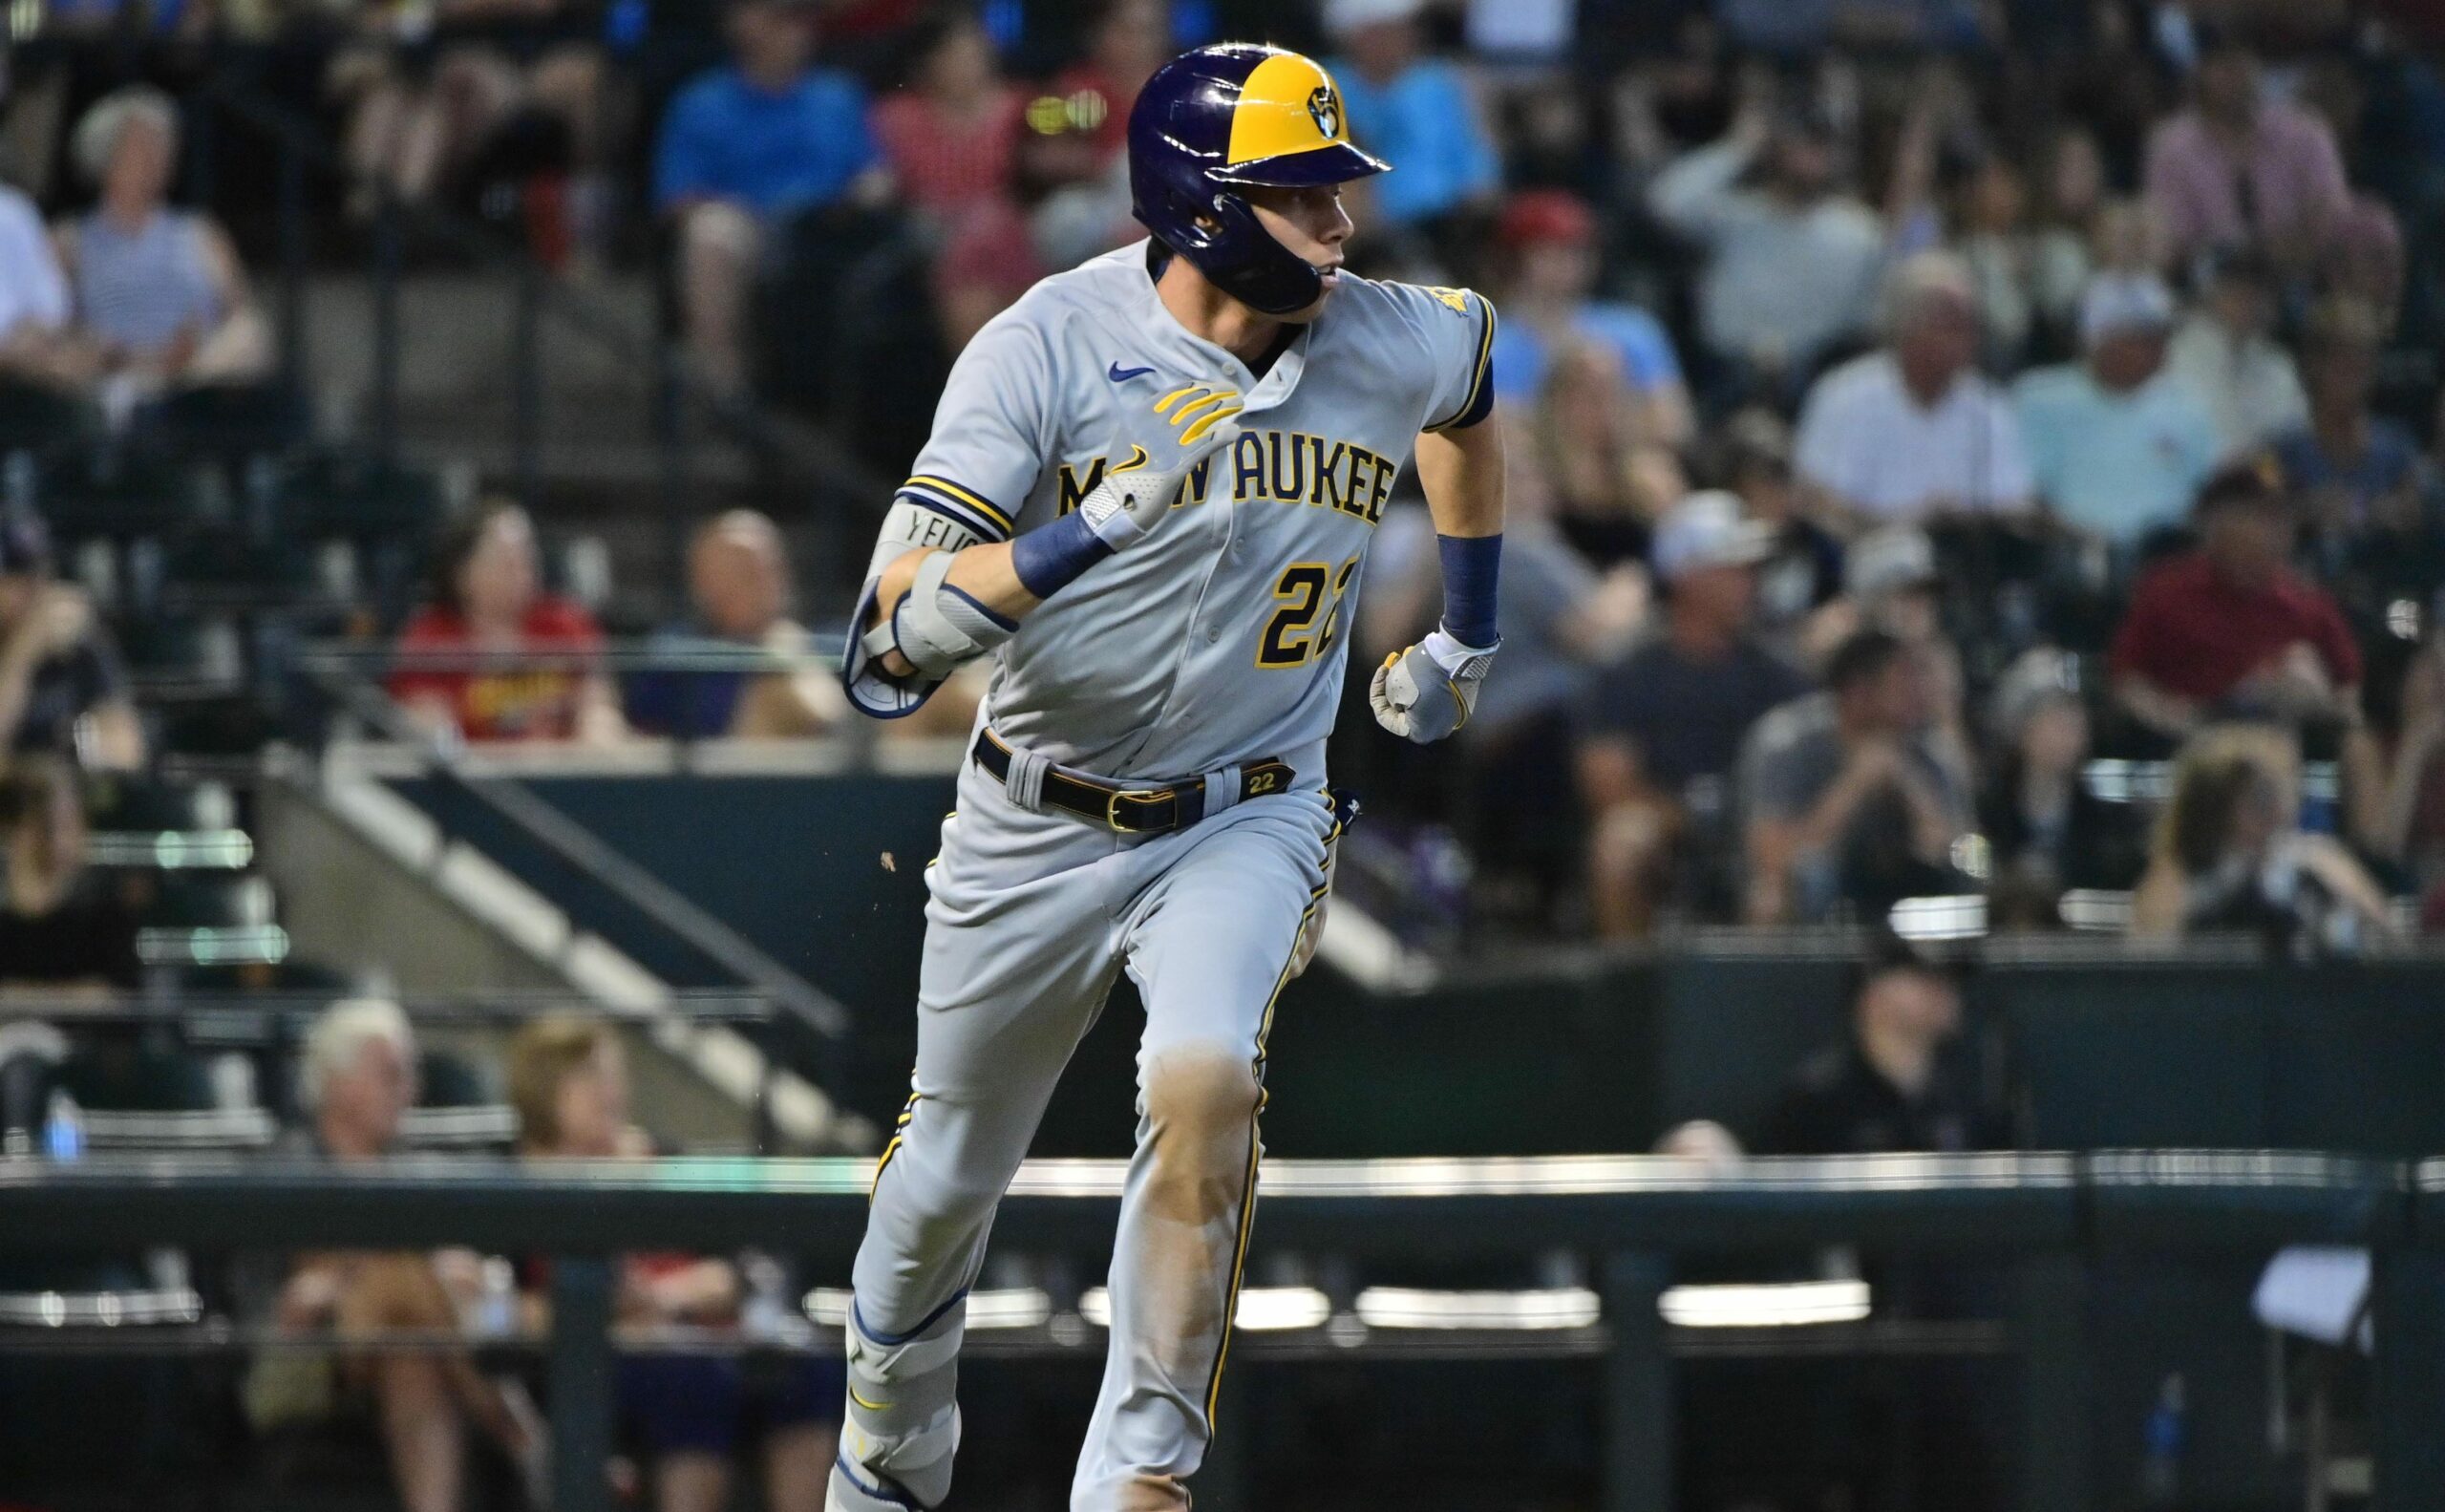 Milwaukee Brewers at San Diego Padres odds, picks and predictions